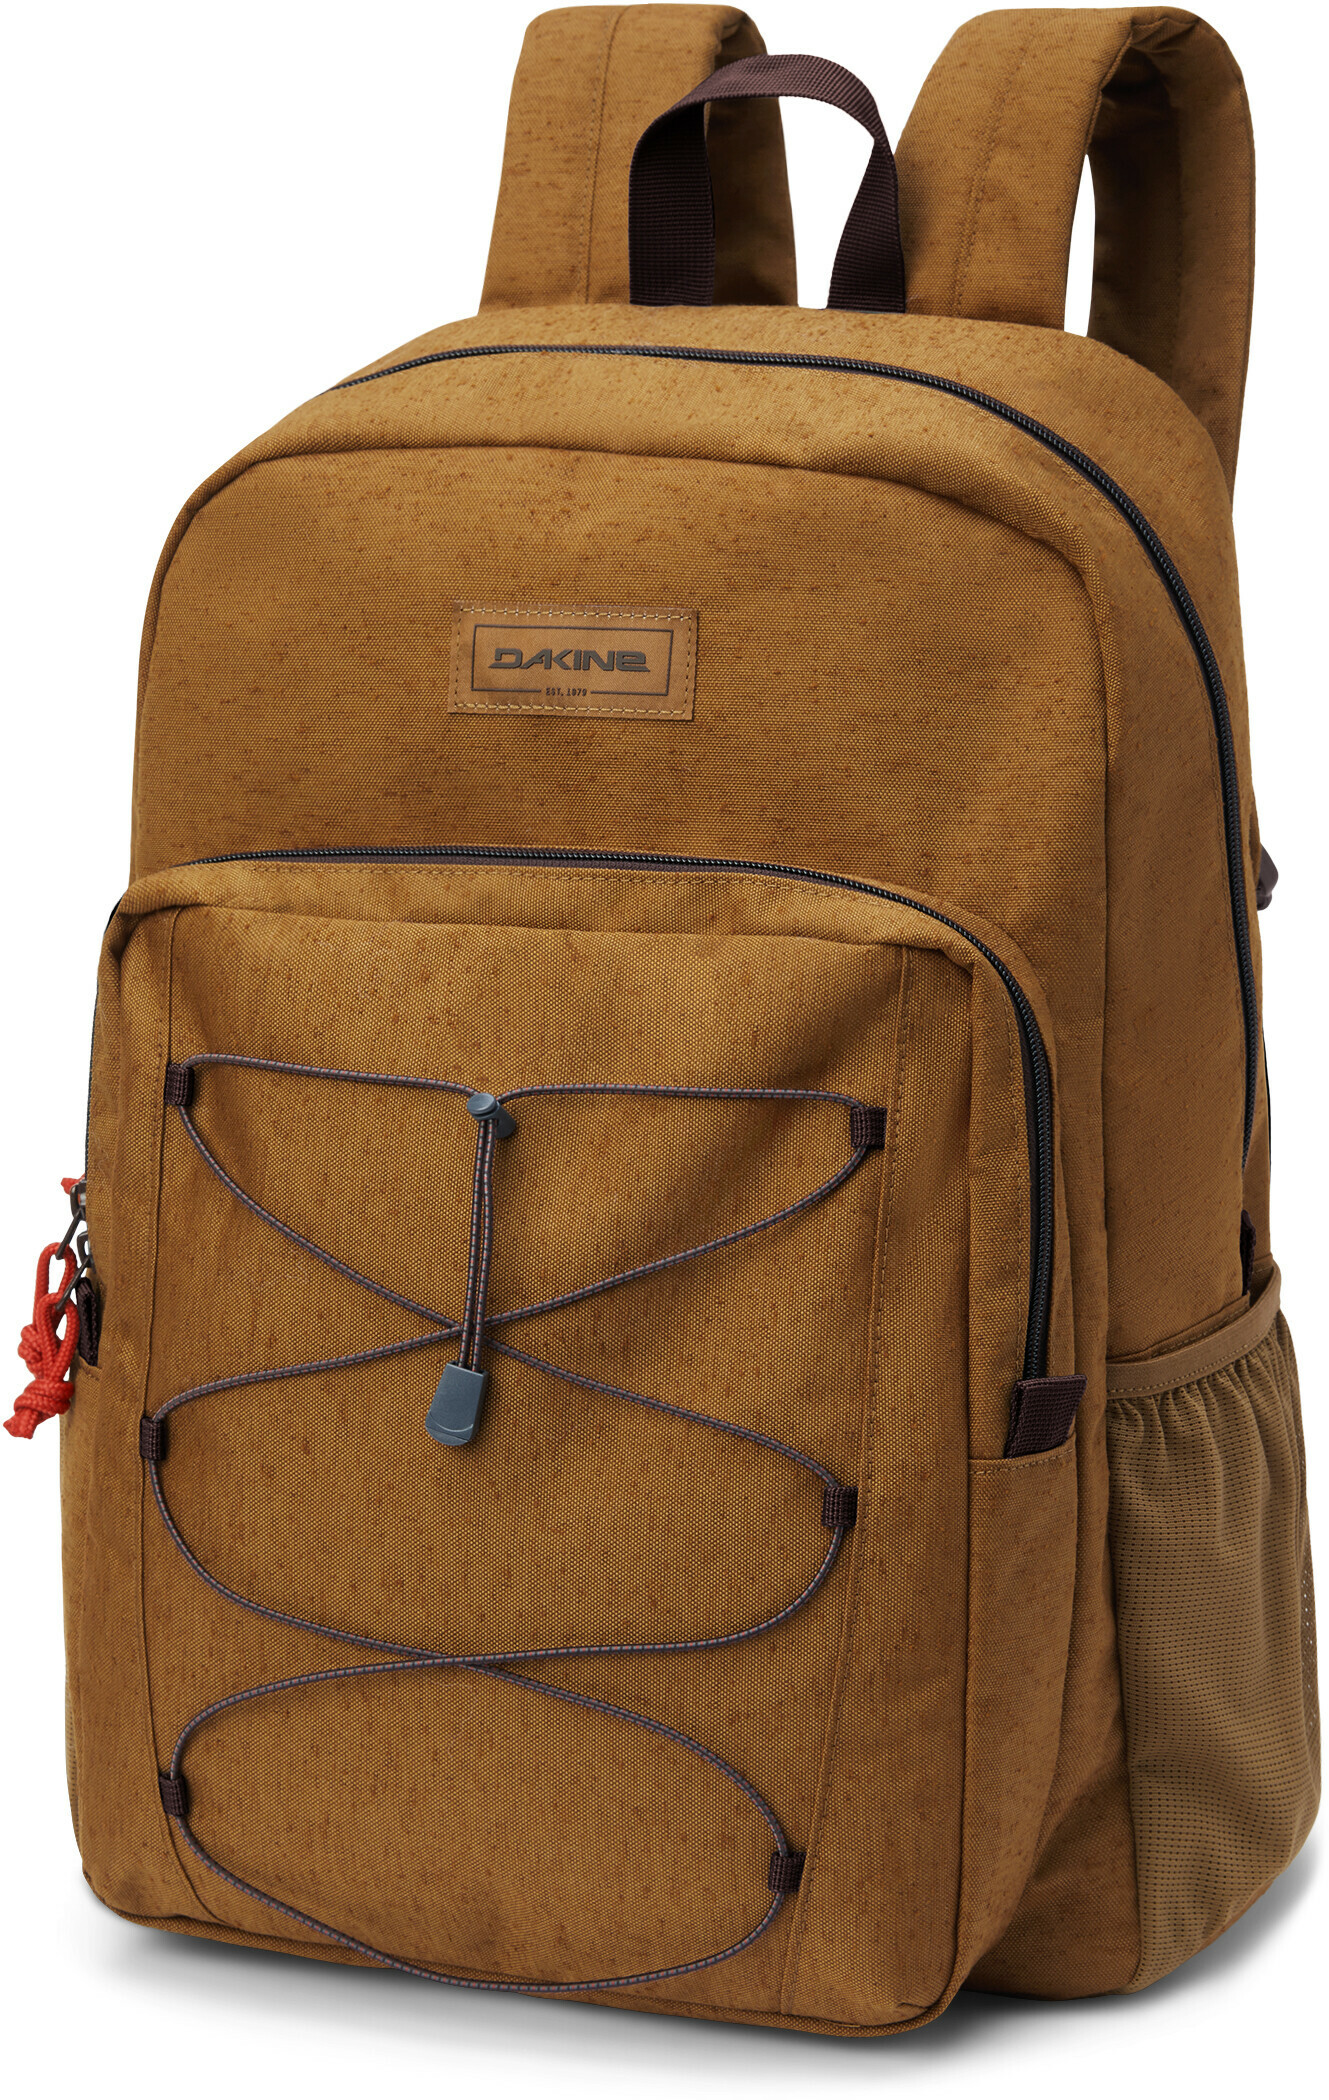 EDUCATED 30L BACKPACK